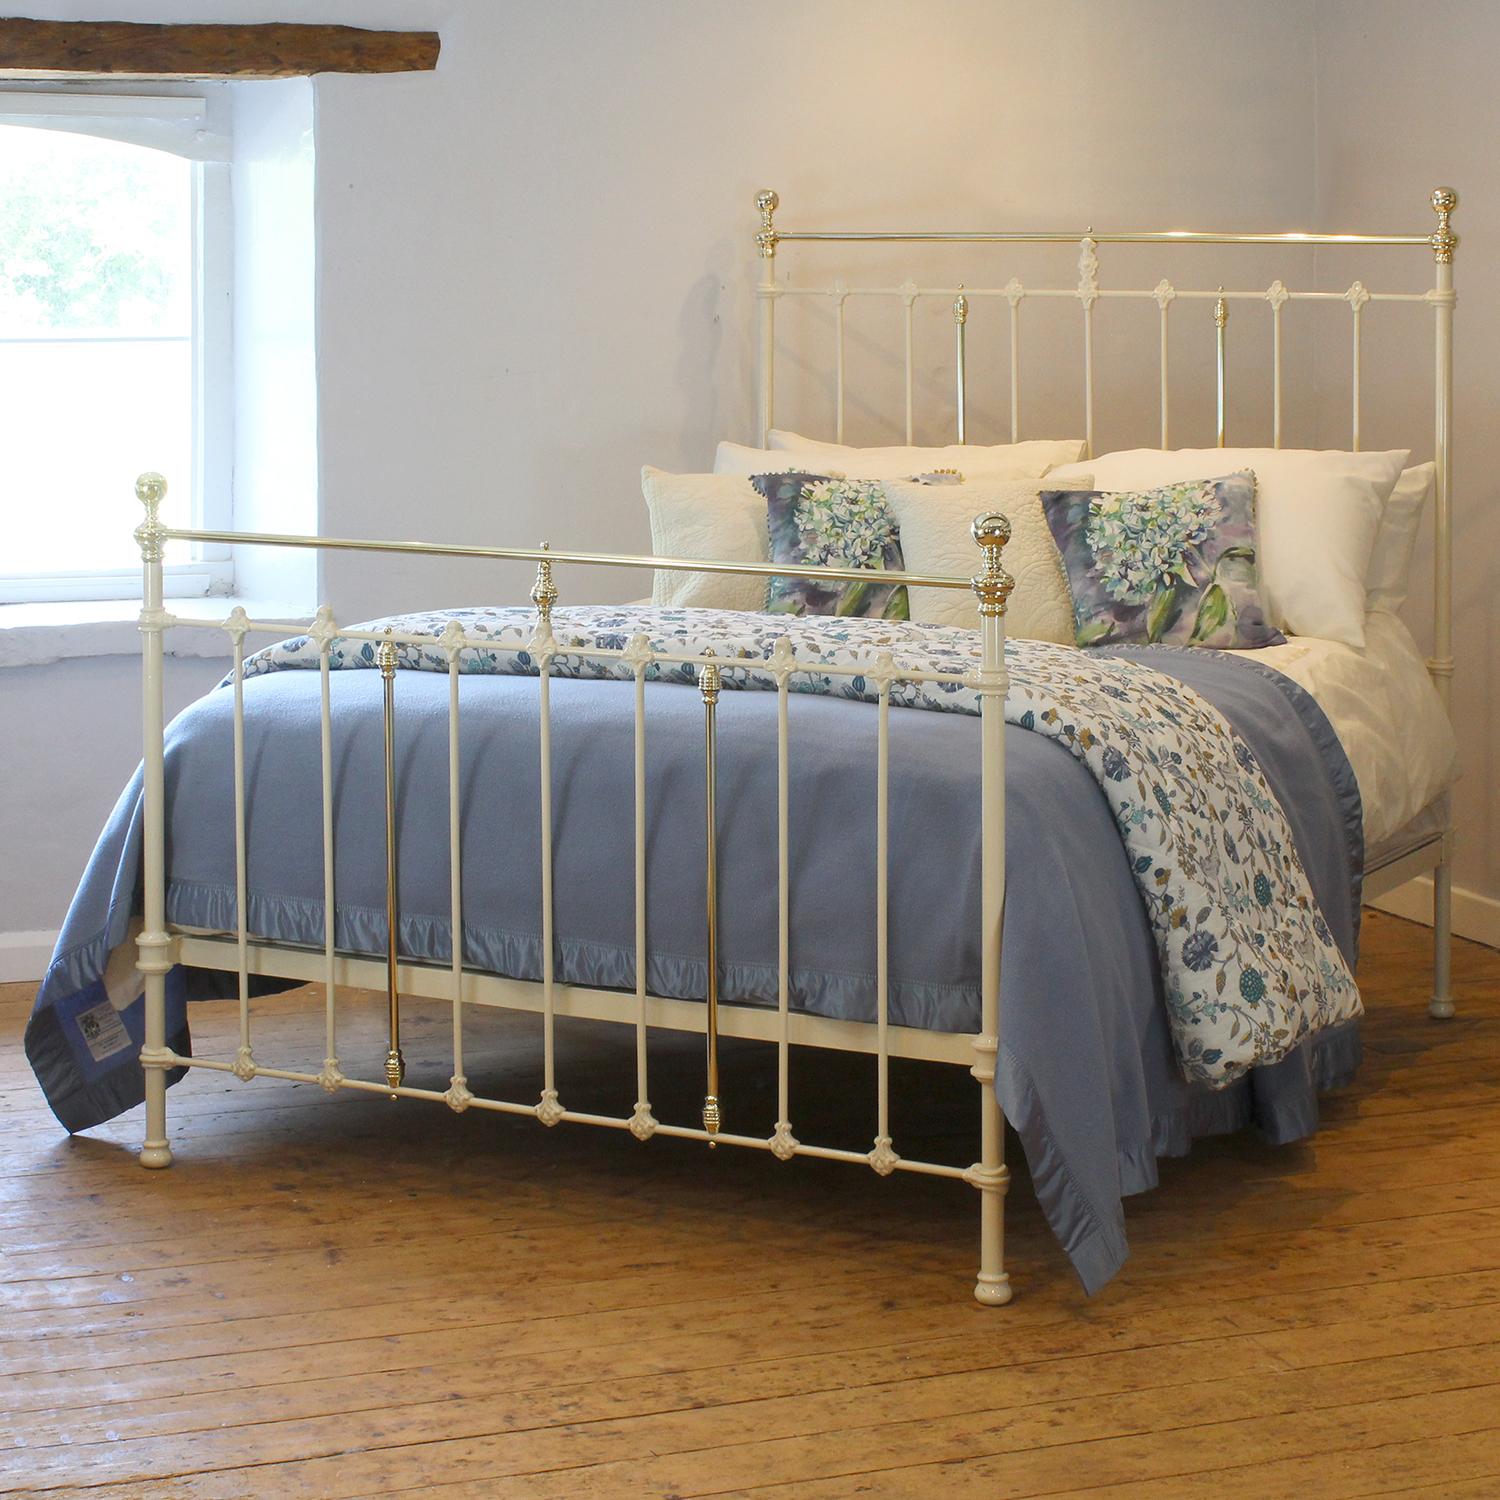 A lovely brass and iron antique bed with pretty mouldings and straight brass top rails.

This bed accepts a UK King or US Queen, 60 inch or 5ft wide, mattress and base.

The price also includes a firm bed base to support the mattress.

The